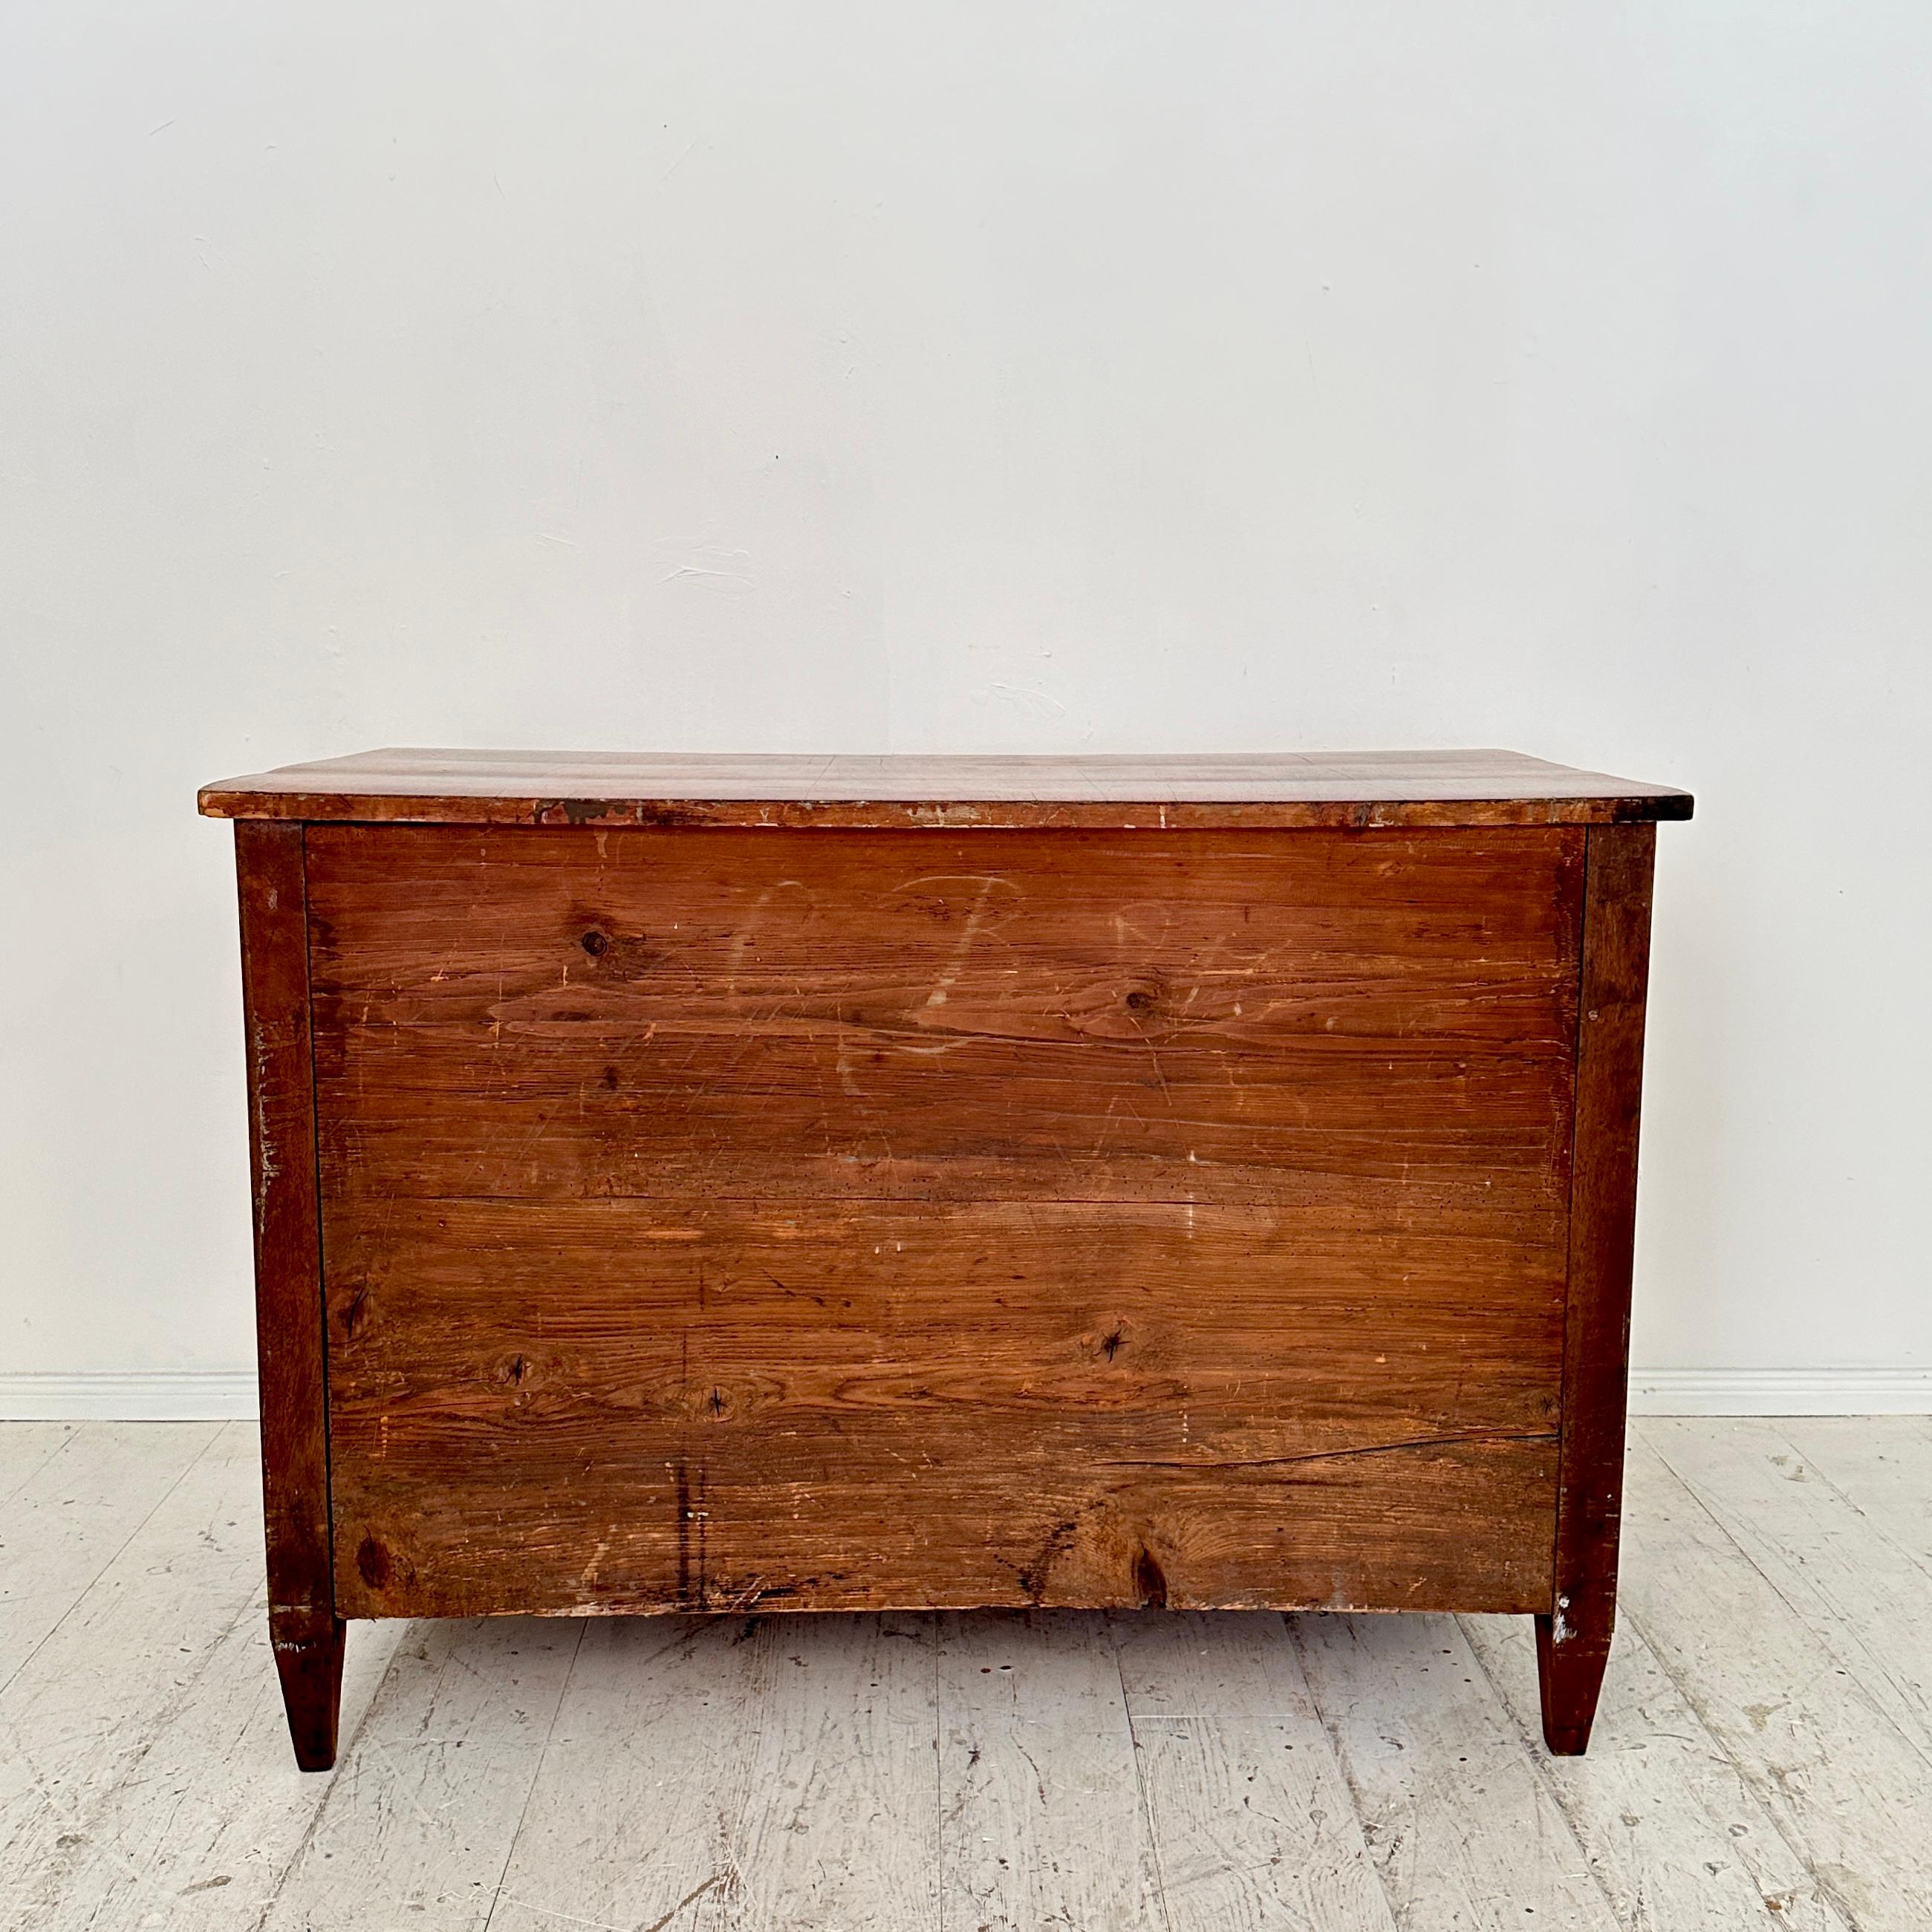 19th Century German Biedermeier Chest of Drawers in Walnut with 3 Drawers, 1820 For Sale 7